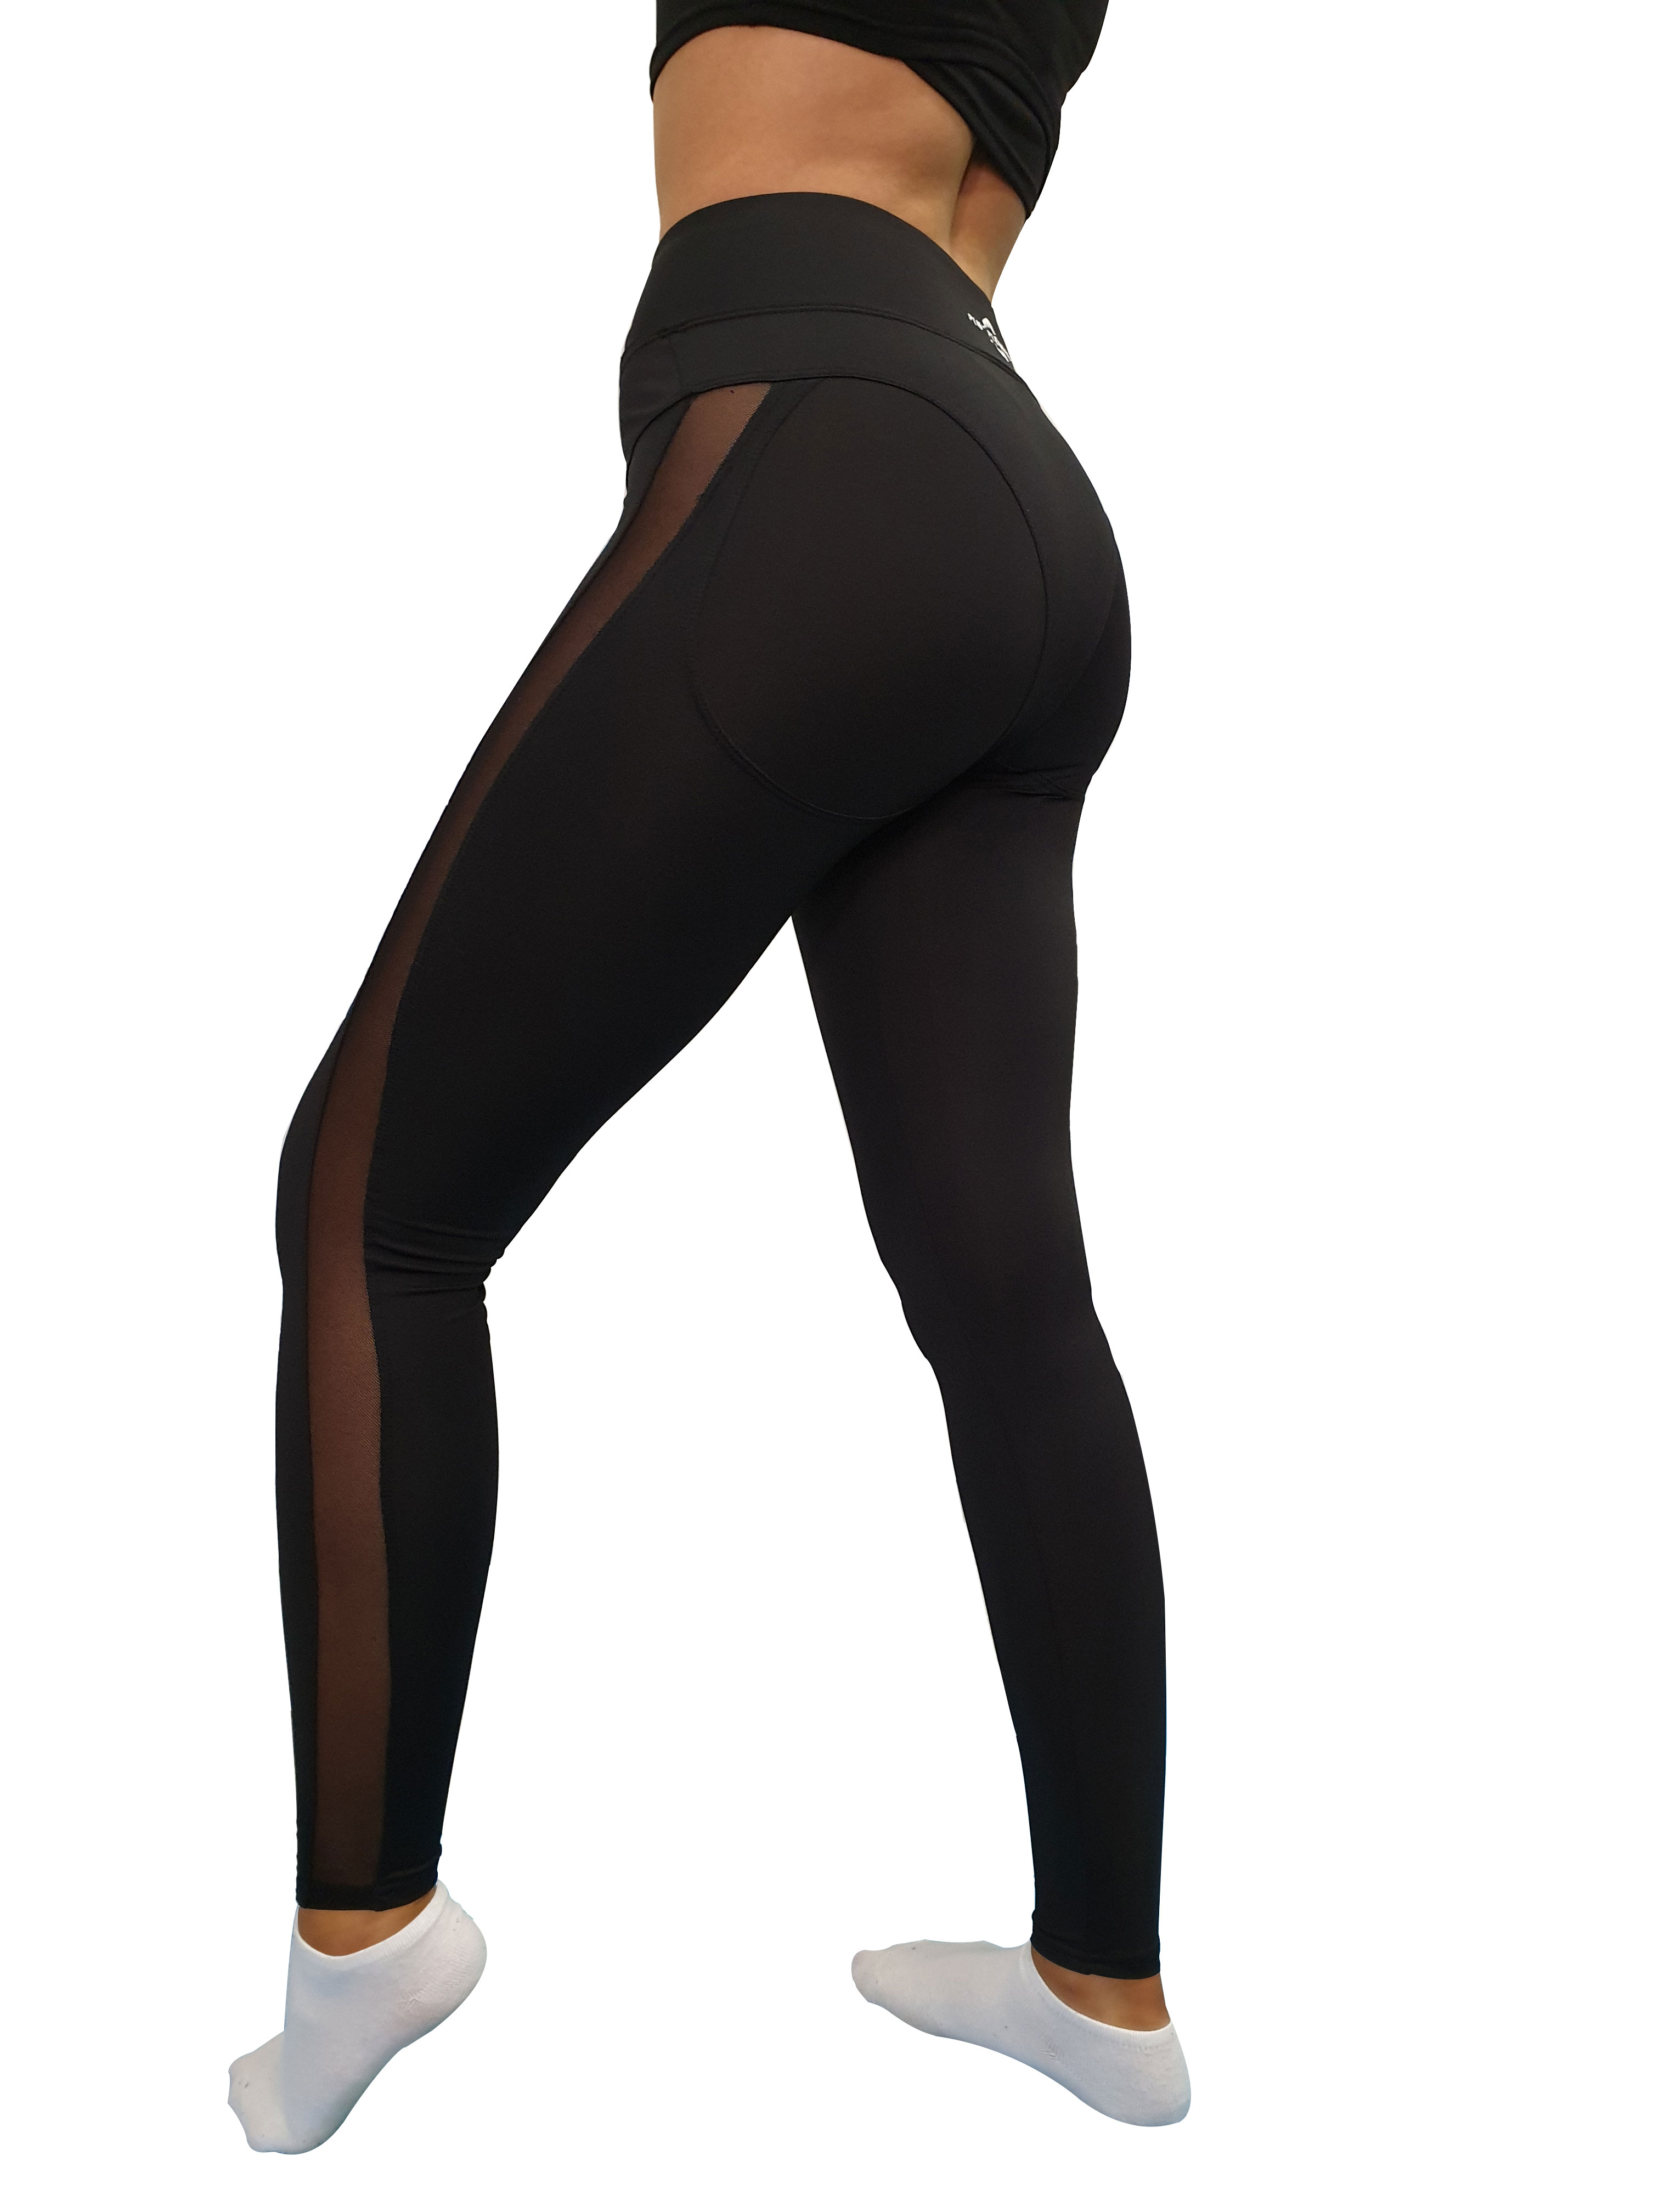 Sexy butt leggings with side mesh inserts